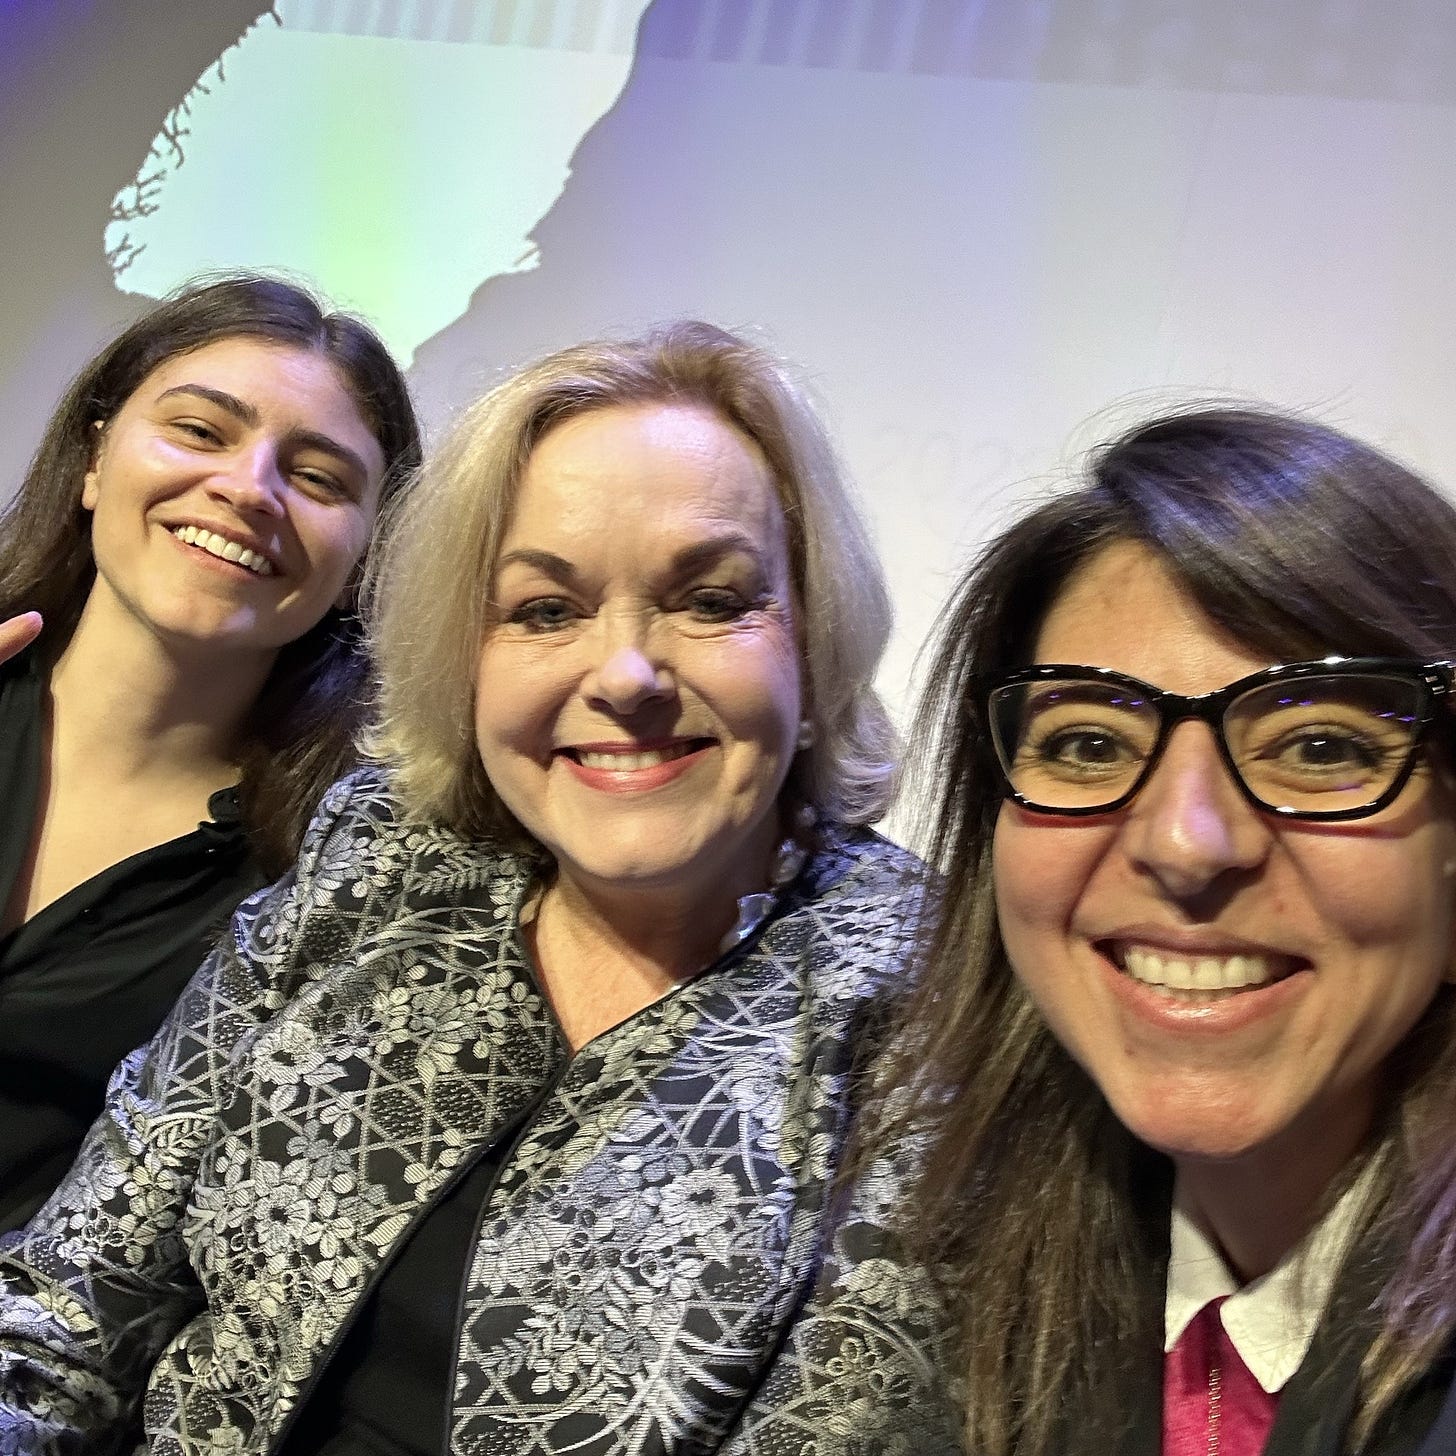 Selfie with Chloe Swarbrick, Judith Collins and Myself at AI conference